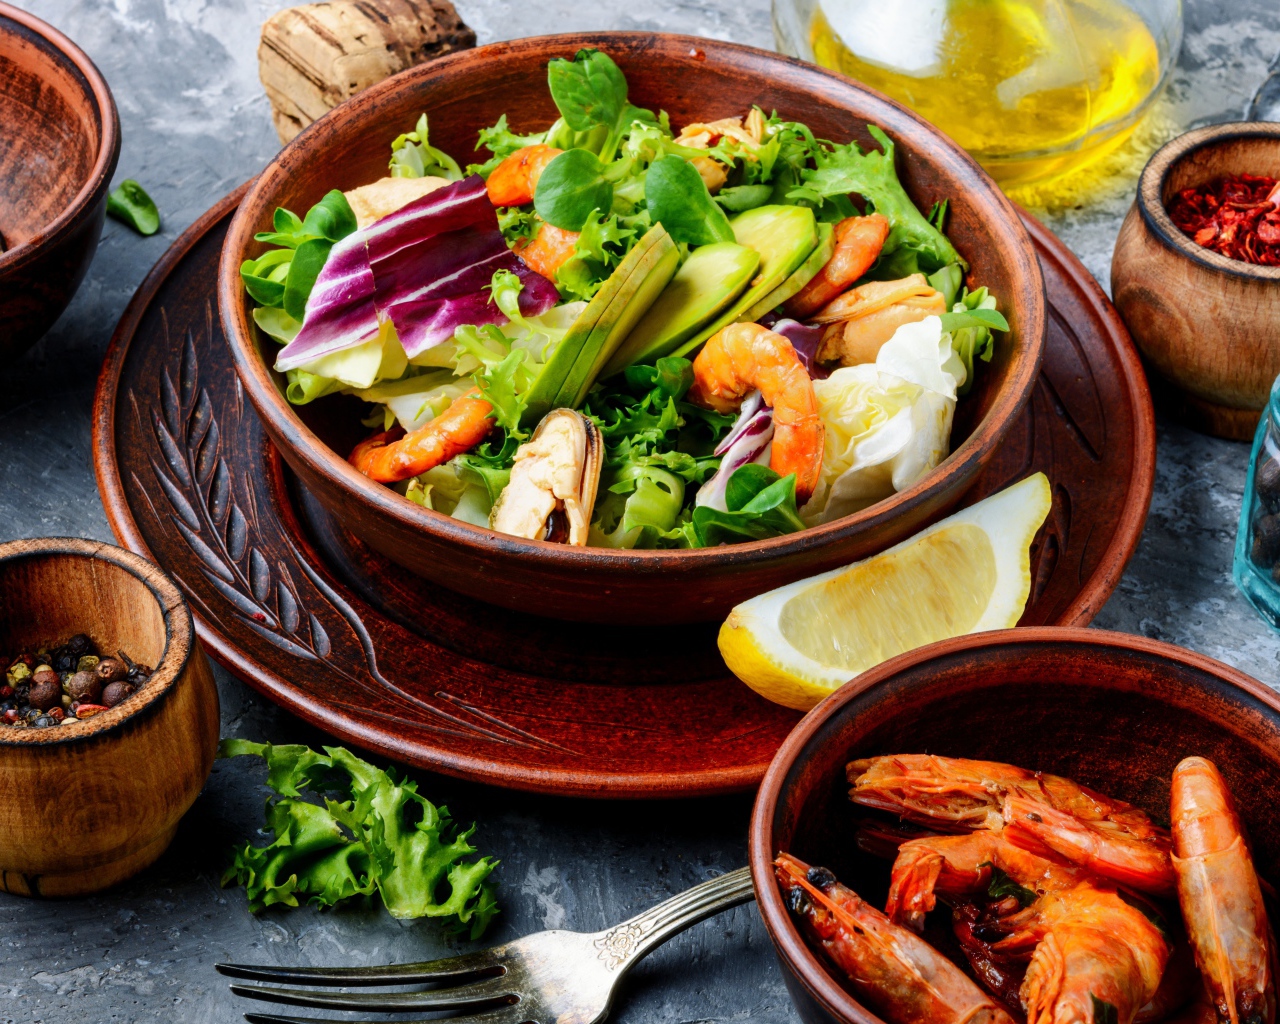 Salad with seafood is on the table with spices